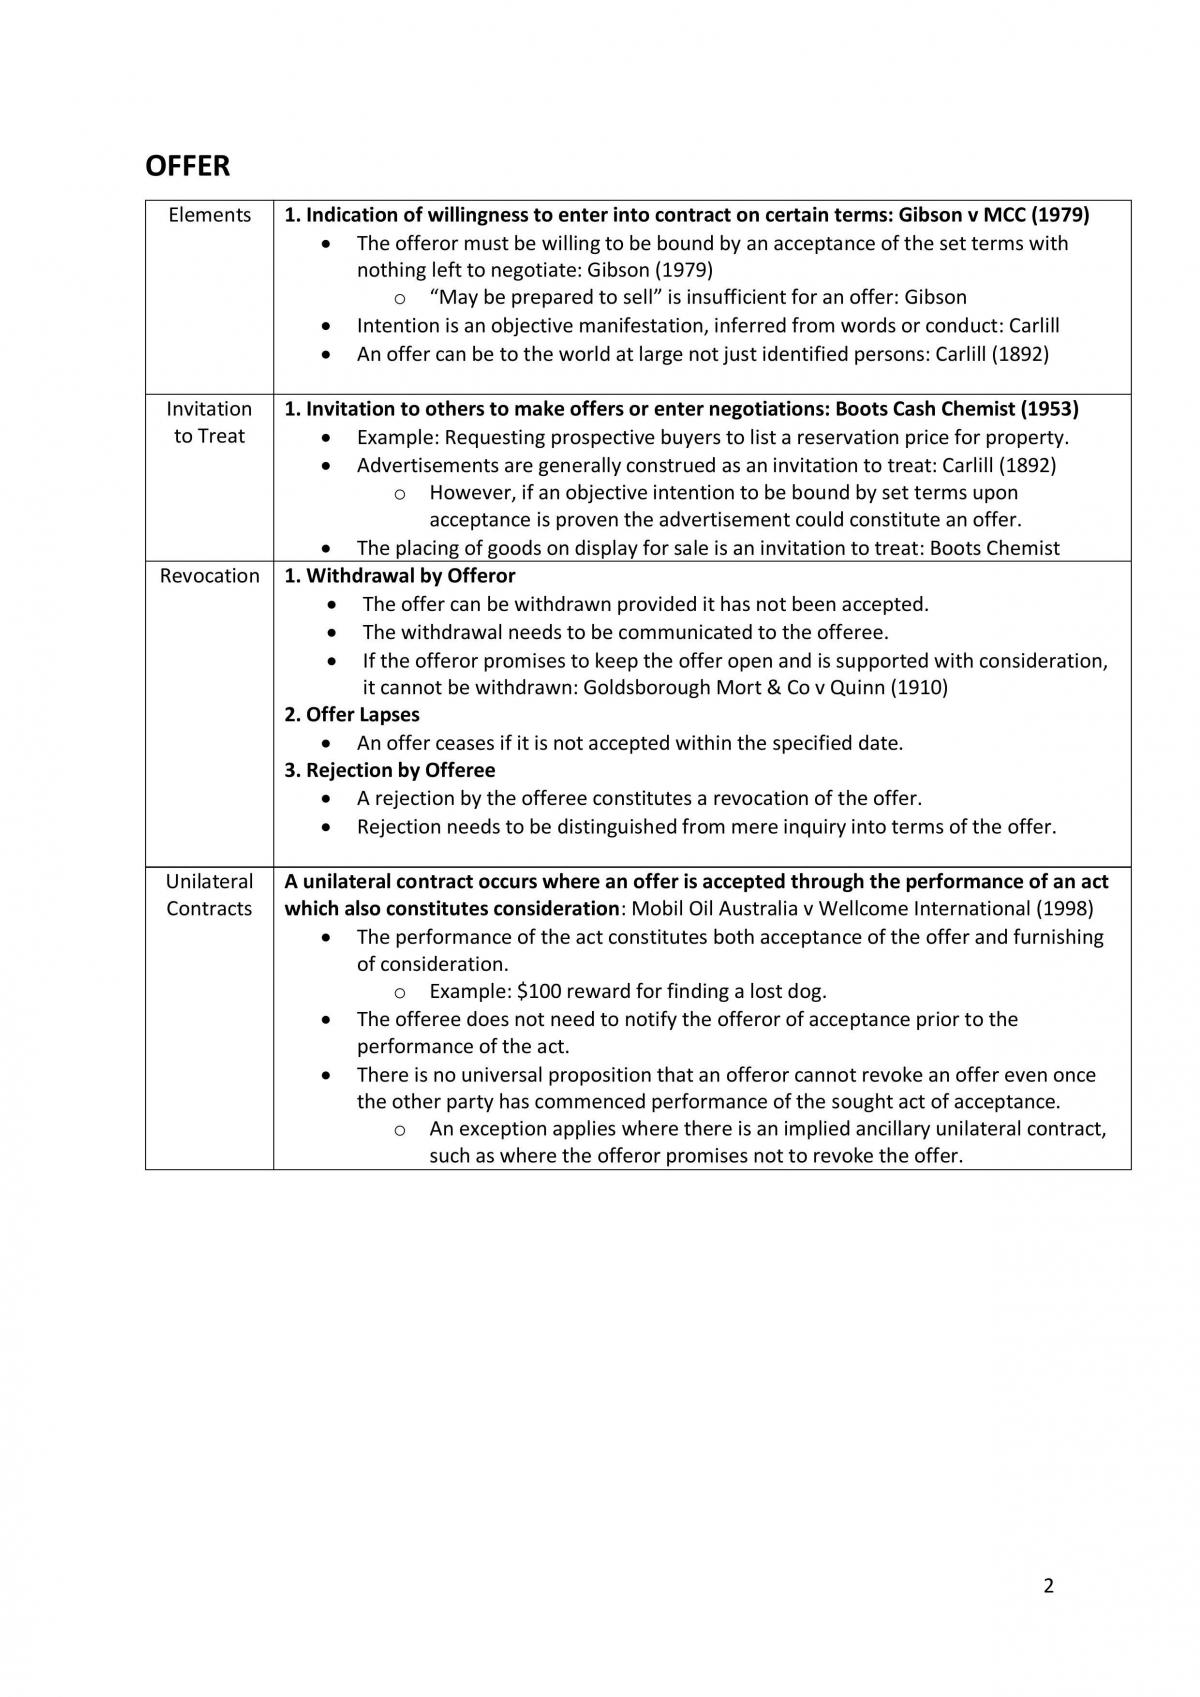 Private Law Summary Notes - Page 2